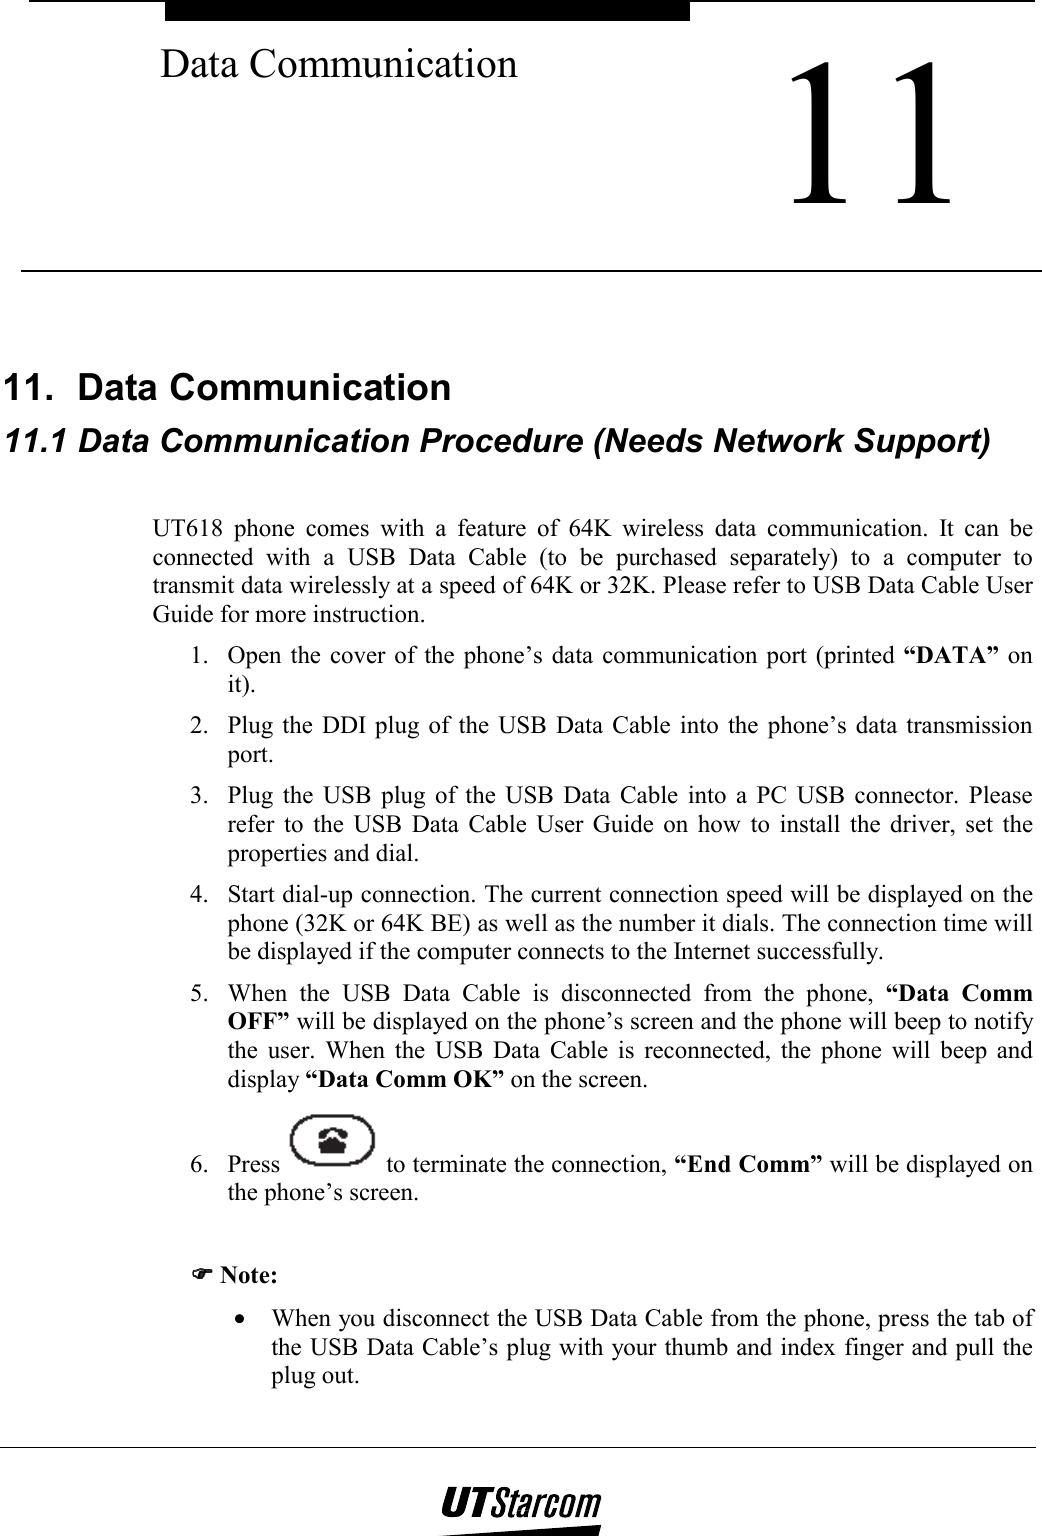  11 Data Communication    11.  Data Communication  11.1 Data Communication Procedure (Needs Network Support)  UT618 phone comes with a feature of 64K wireless data communication. It can be connected with a USB Data Cable (to be purchased separately) to a computer to transmit data wirelessly at a speed of 64K or 32K. Please refer to USB Data Cable User Guide for more instruction. 1.  Open the cover of the phone’s data communication port (printed “DATA” on it). 2.  Plug the DDI plug of the USB Data Cable into the phone’s data transmission port. 3.  Plug the USB plug of the USB Data Cable into a PC USB connector. Please refer to the USB Data Cable User Guide on how to install the driver, set the properties and dial. 4.  Start dial-up connection. The current connection speed will be displayed on the phone (32K or 64K BE) as well as the number it dials. The connection time will be displayed if the computer connects to the Internet successfully. 5.  When the USB Data Cable is disconnected from the phone, “Data Comm OFF” will be displayed on the phone’s screen and the phone will beep to notify the user. When the USB Data Cable is reconnected, the phone will beep and display “Data Comm OK” on the screen. 6. Press   to terminate the connection, “End Comm” will be displayed on the phone’s screen.  )))) Note: •  When you disconnect the USB Data Cable from the phone, press the tab of the USB Data Cable’s plug with your thumb and index finger and pull the plug out. 